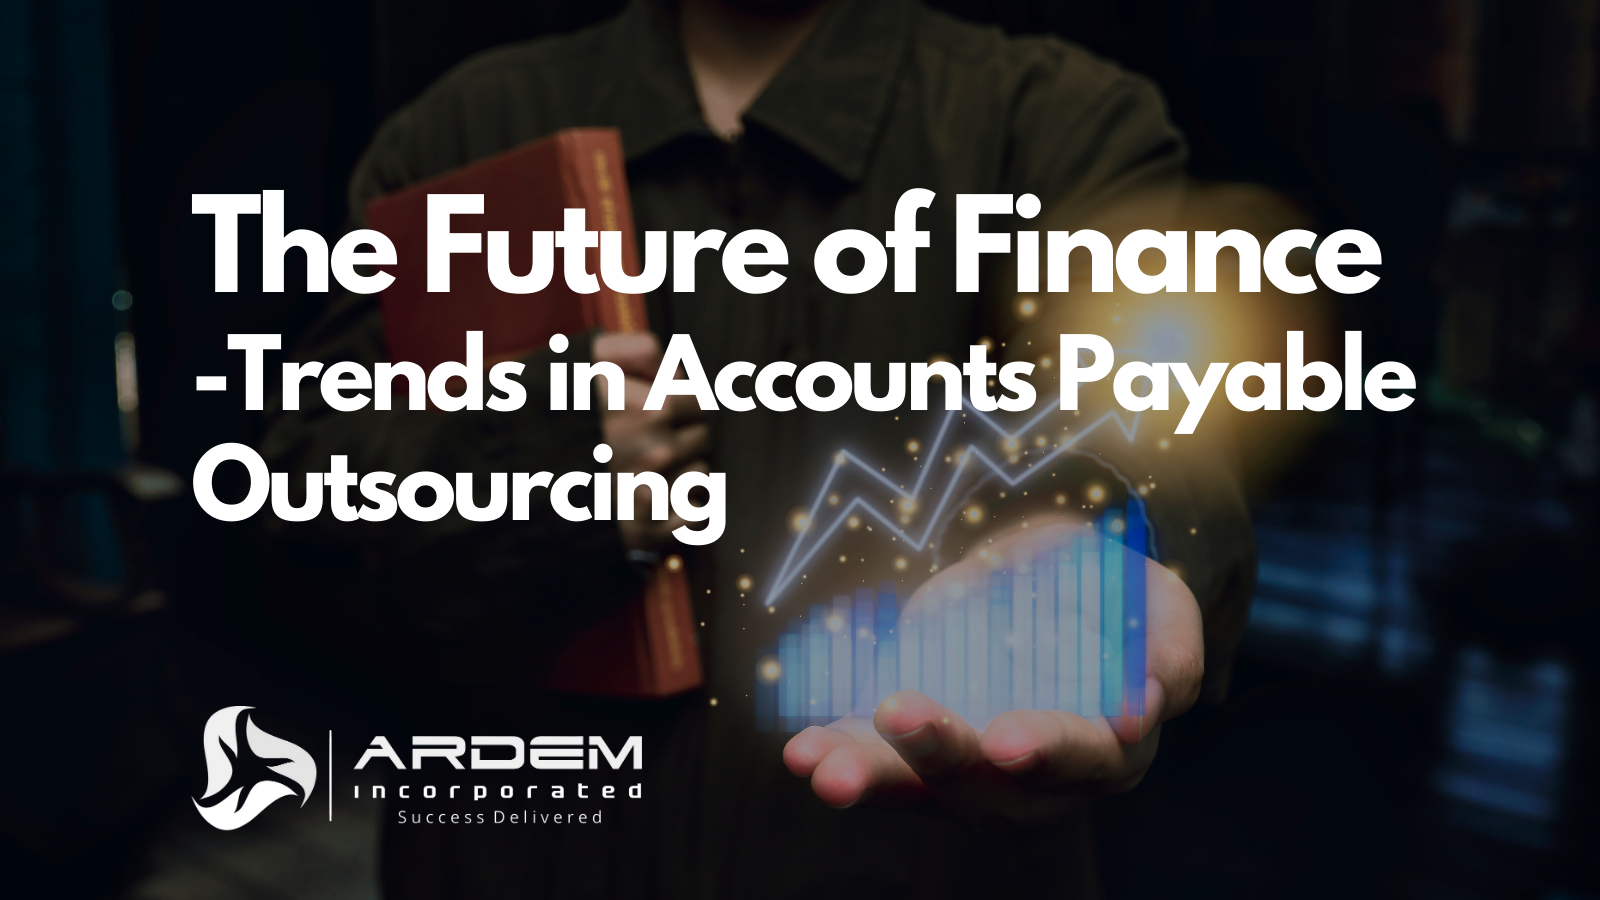 Accounts Payable Outsourcing Financal Trends Blog